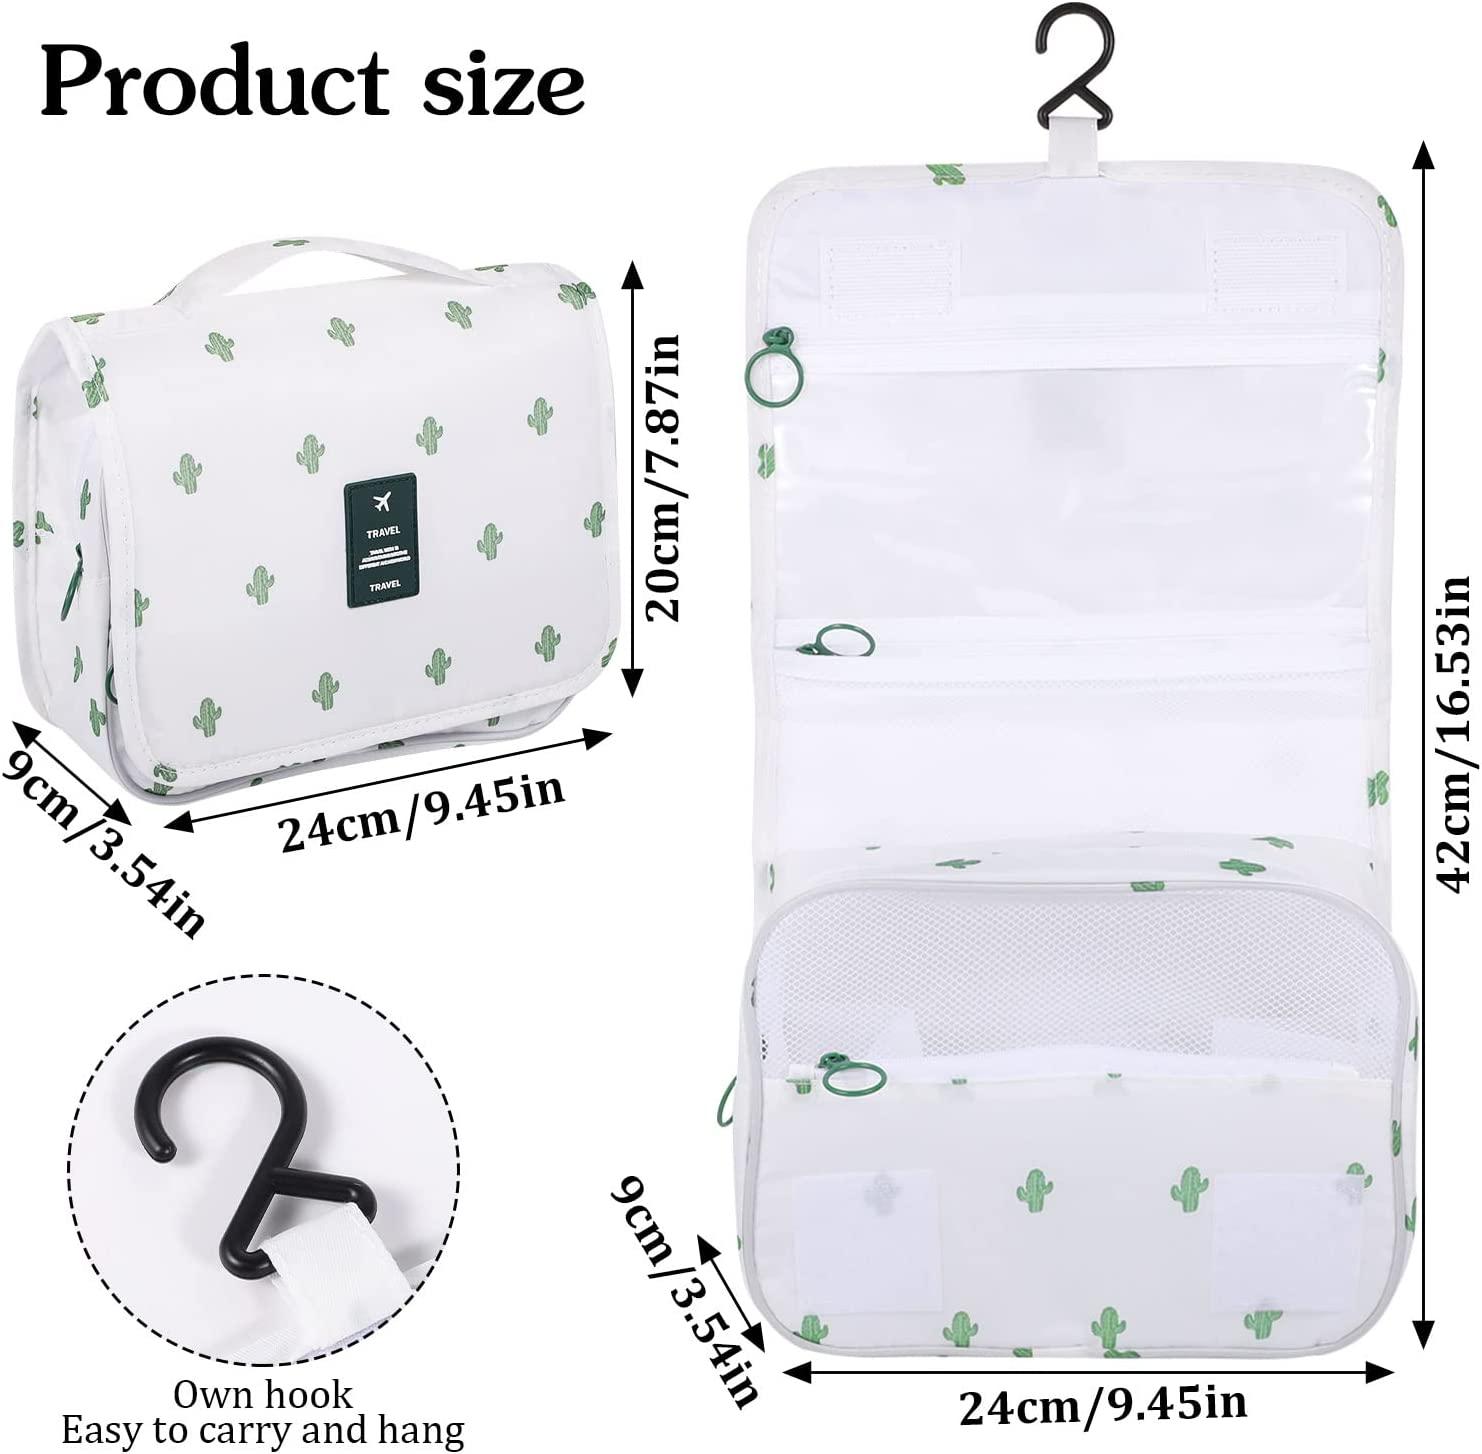 MHDGG Makeup Bag Lazy Cosmetic Bag Travel Toiletry Bag Cosmetic Make Up Organizer Waterproof Travel Accessories for Women and Girls,Mini Cactus